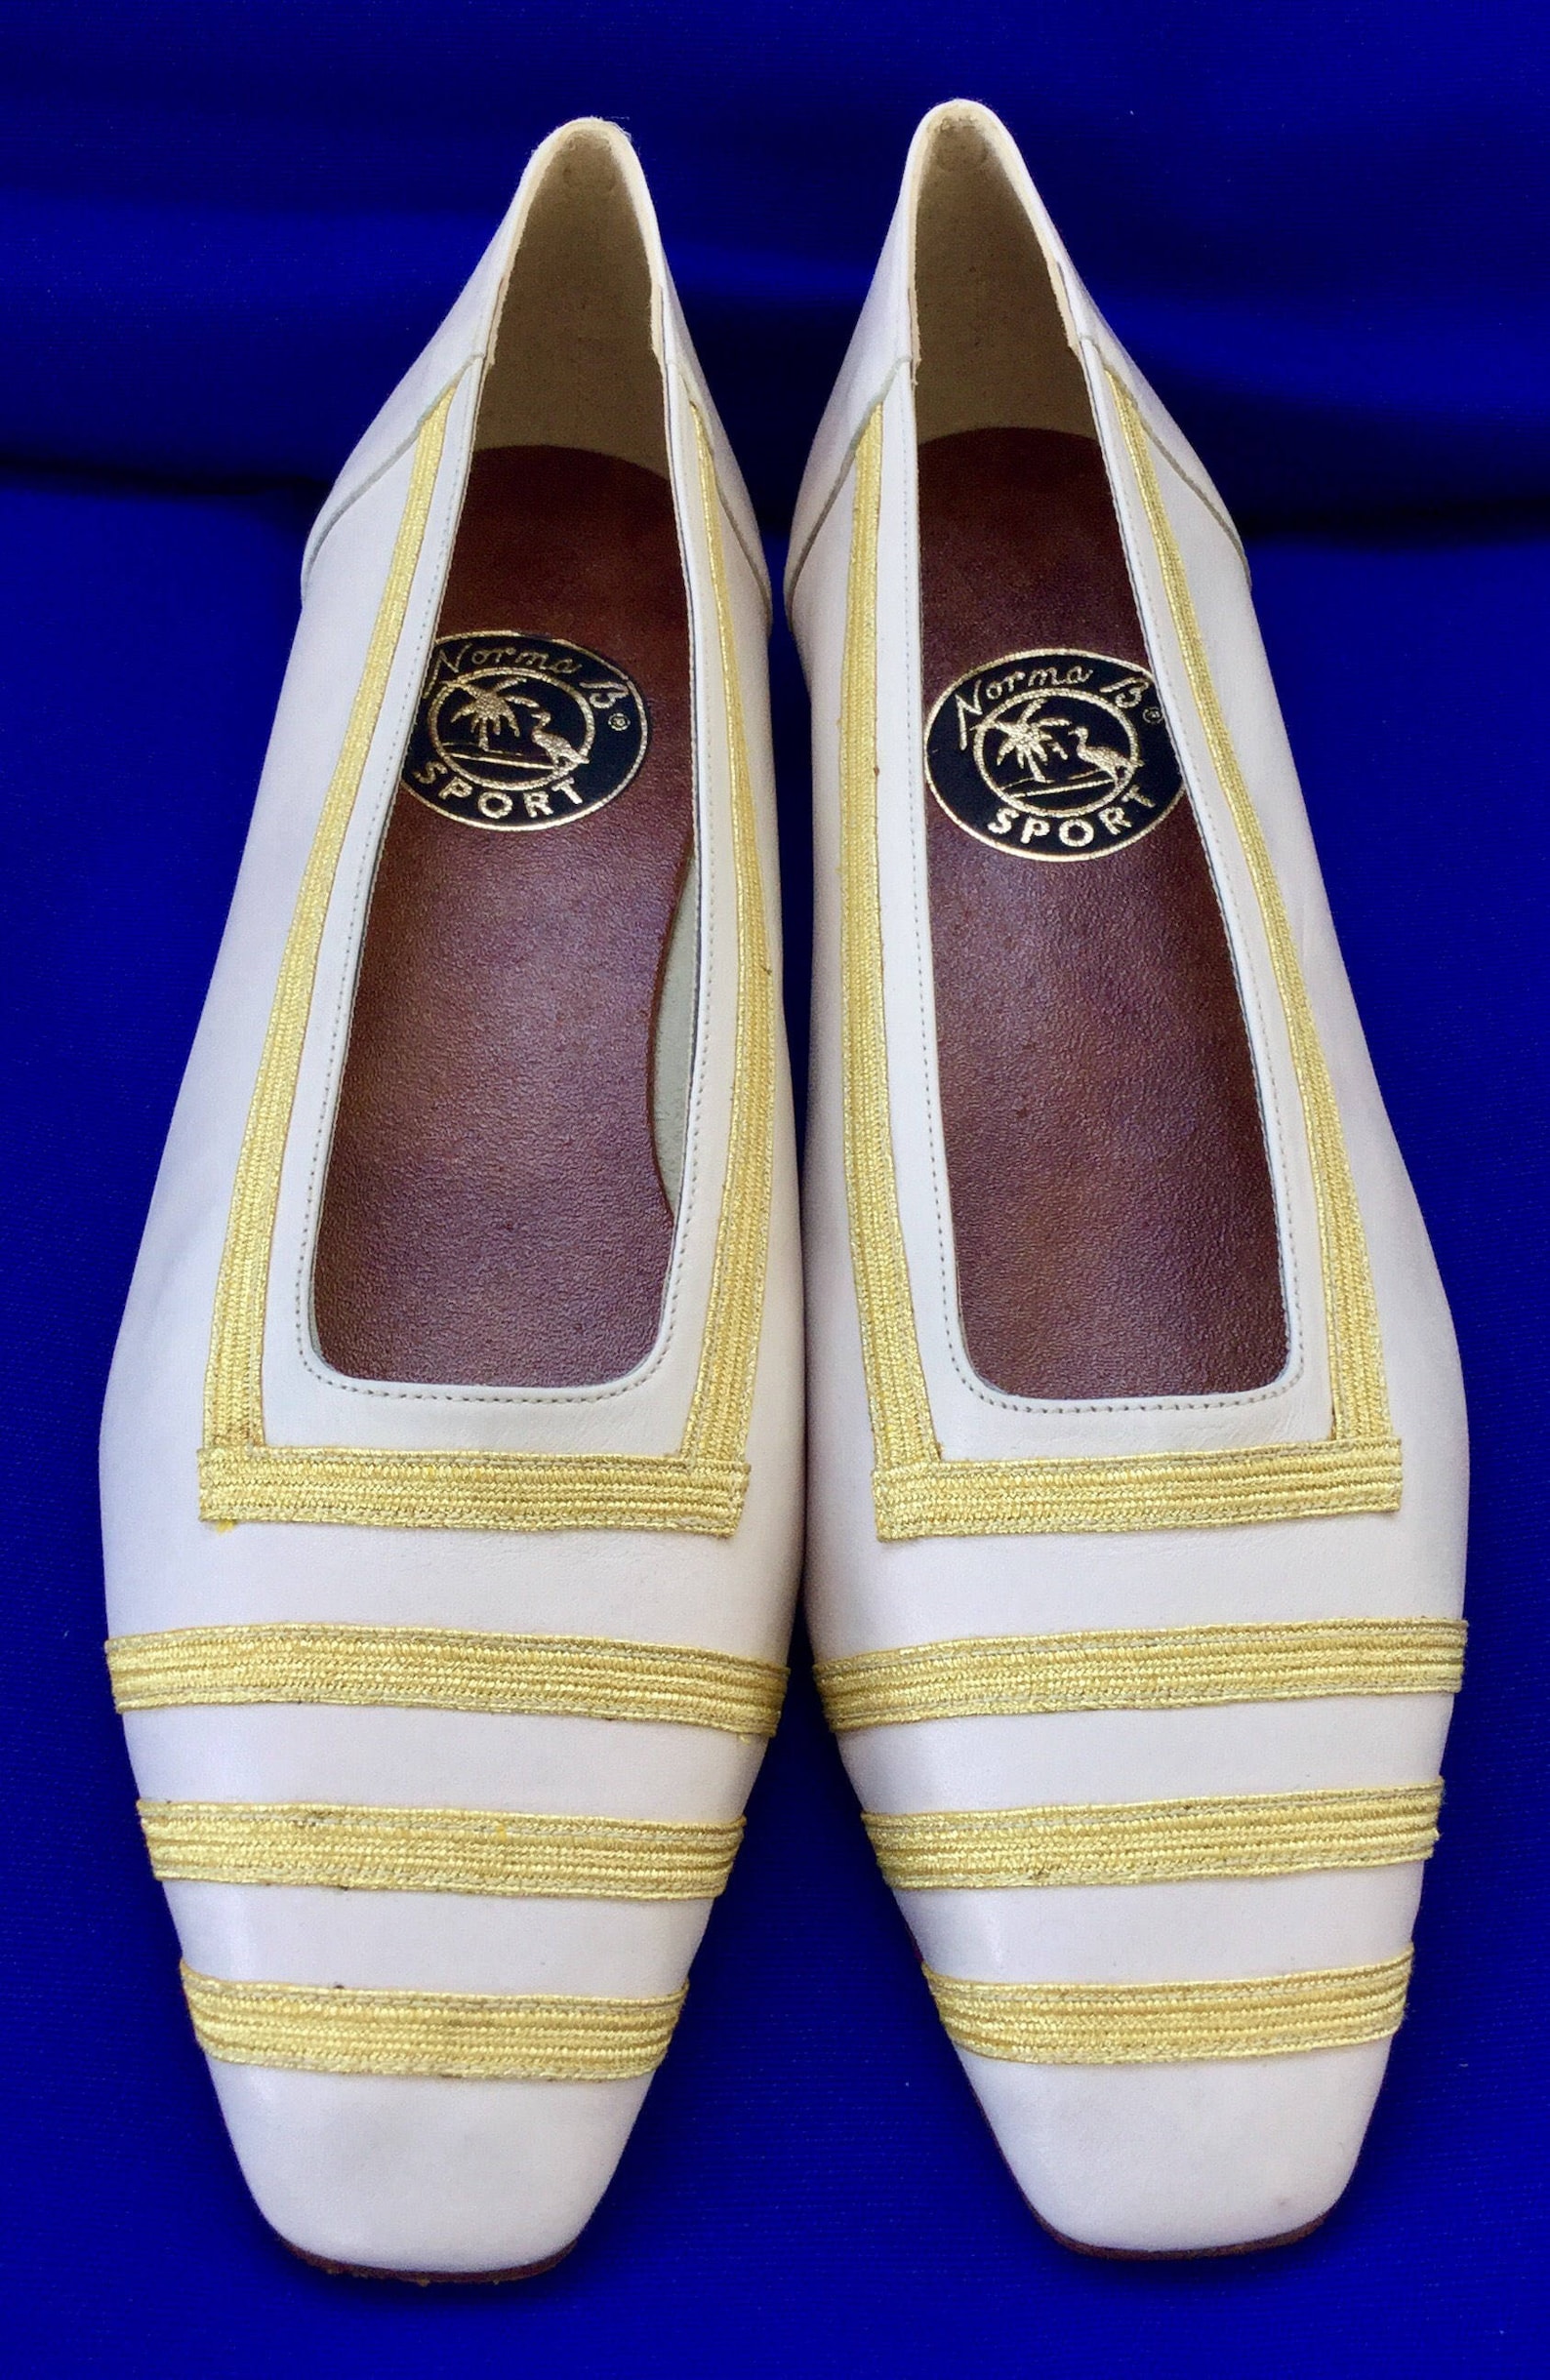 cool vintage nautical norma b sport white leather w/gold band square toe ballet/flat shoes(reduced)